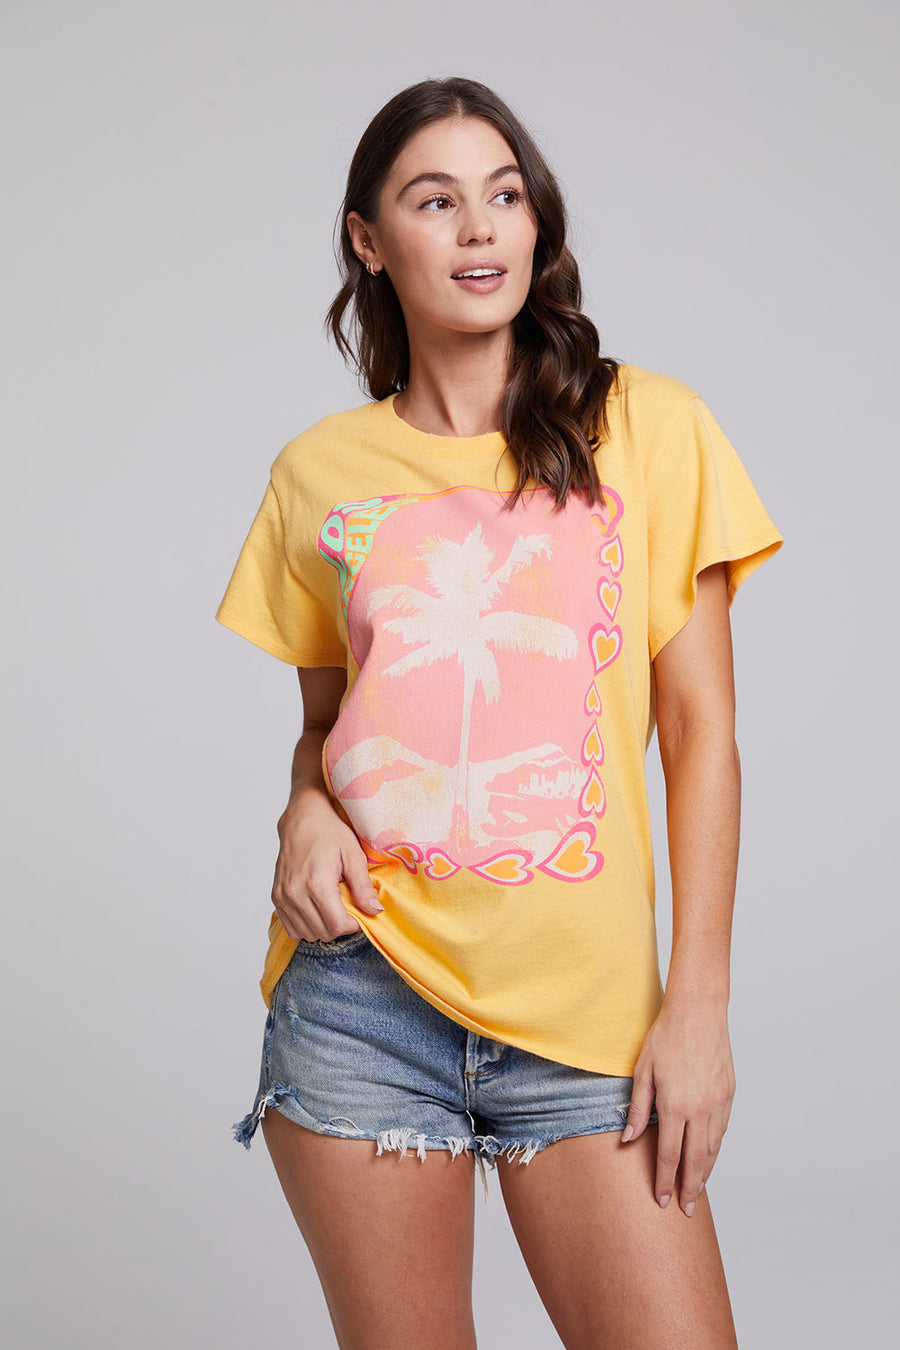 Los Angeles Tee WOMENS chaserbrand